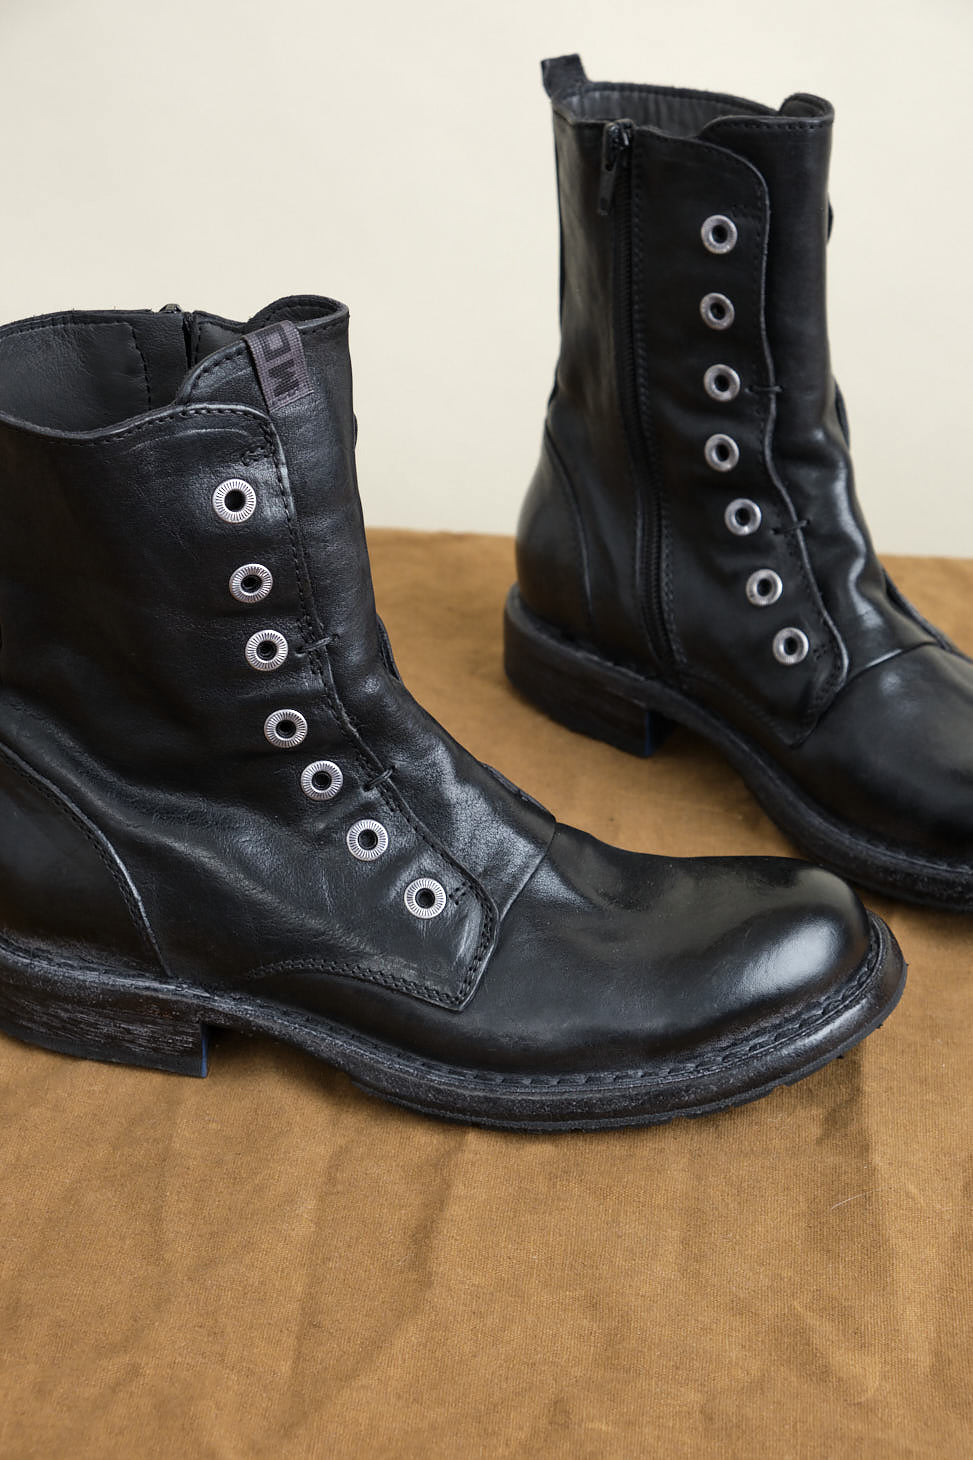 Detailing on Male Ankle Boot